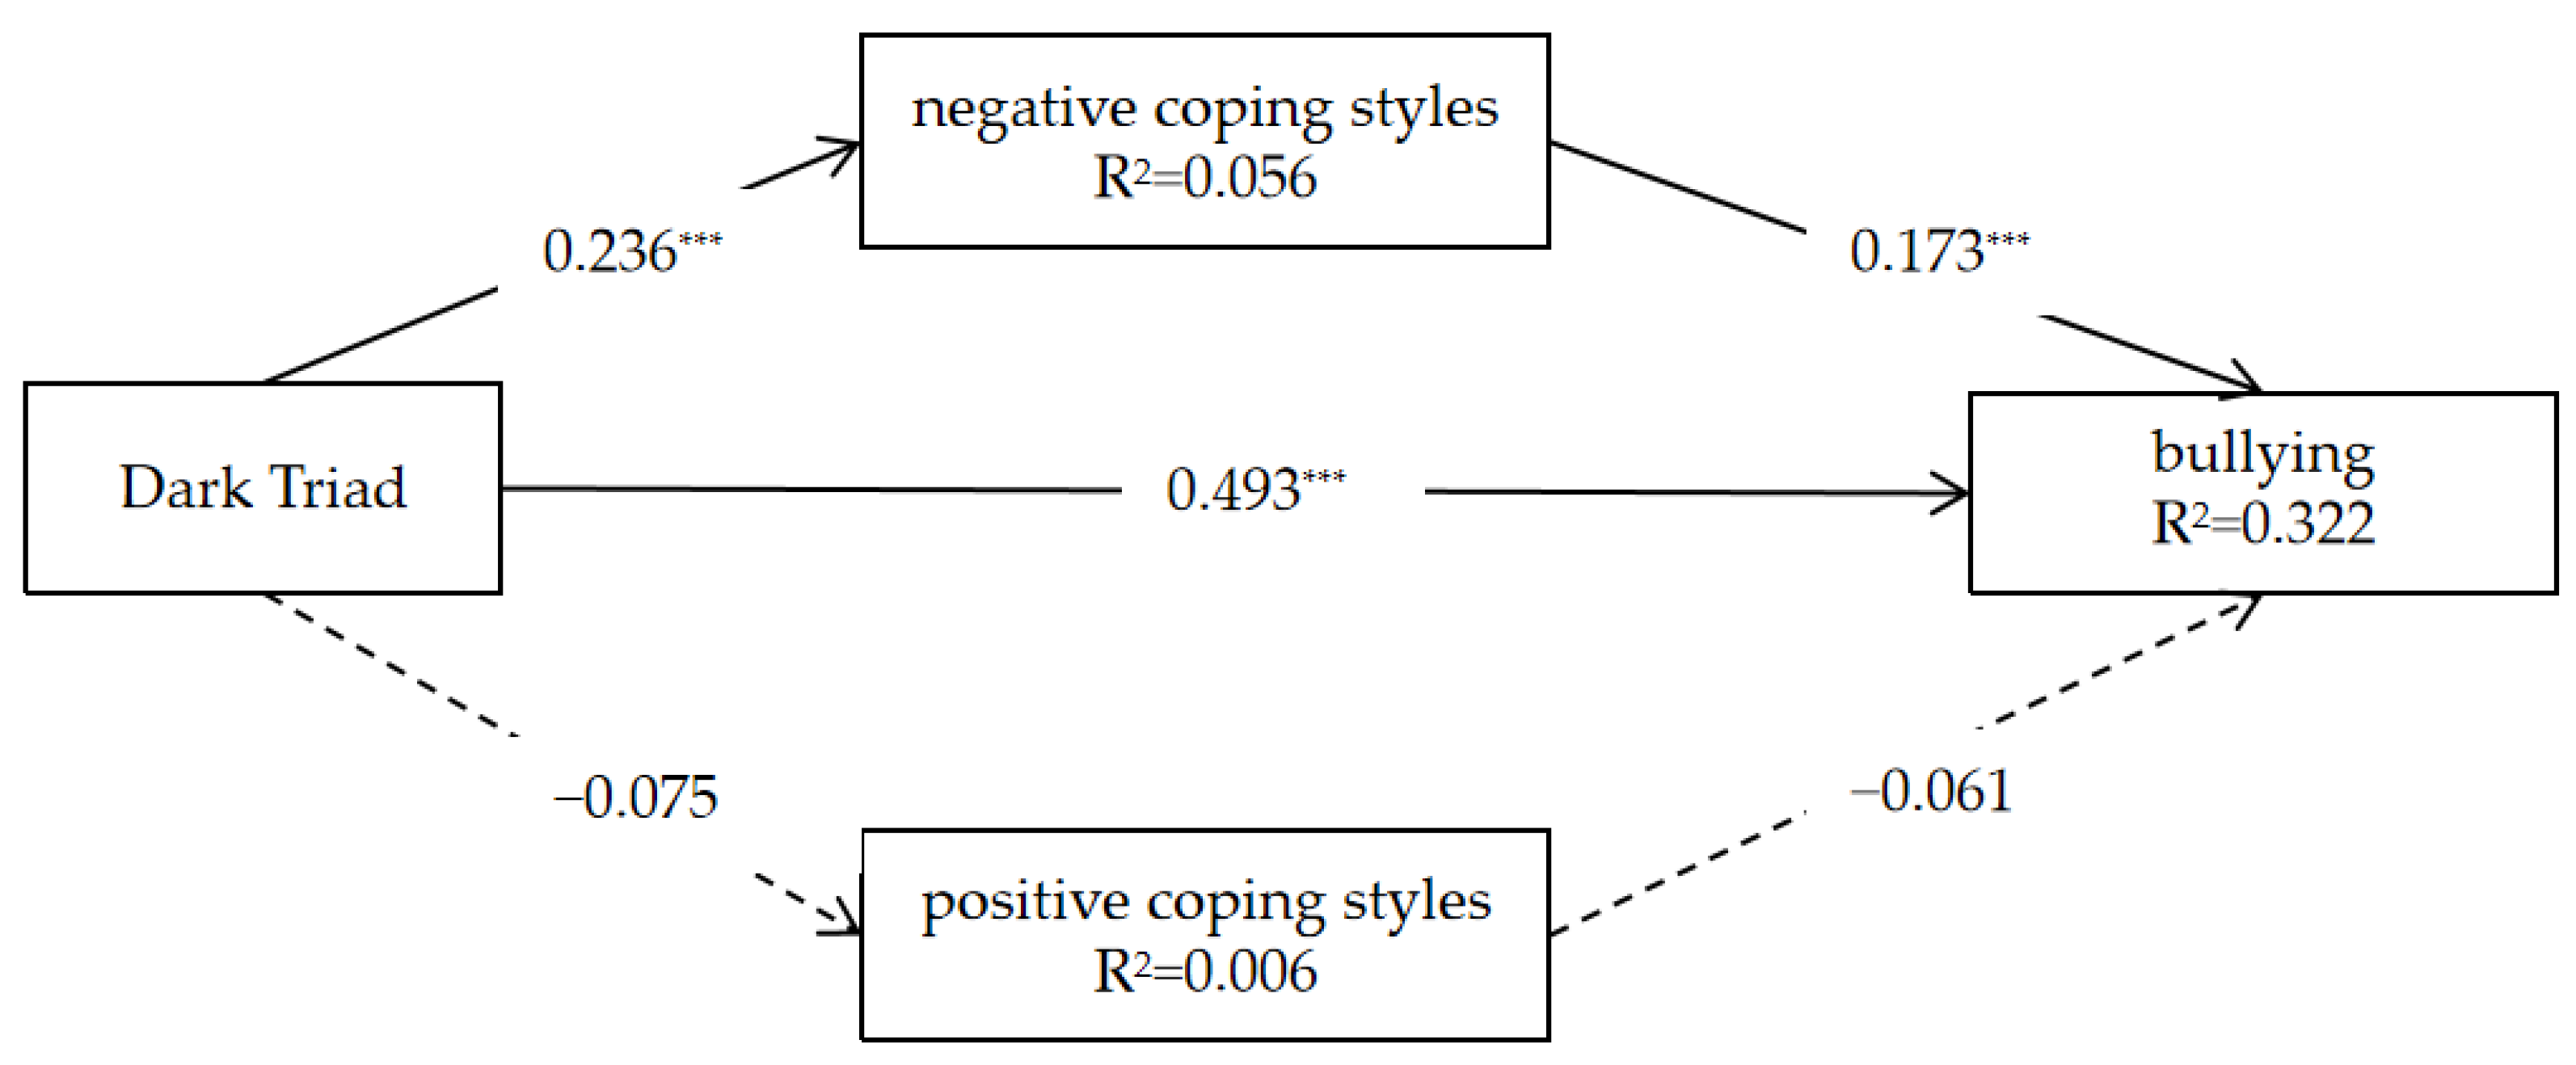 Behavioral Sciences | Free Full-Text | The Role of Coping Styles in  Mediating the Dark Triad and Bullying: An Analysis of Gender Difference